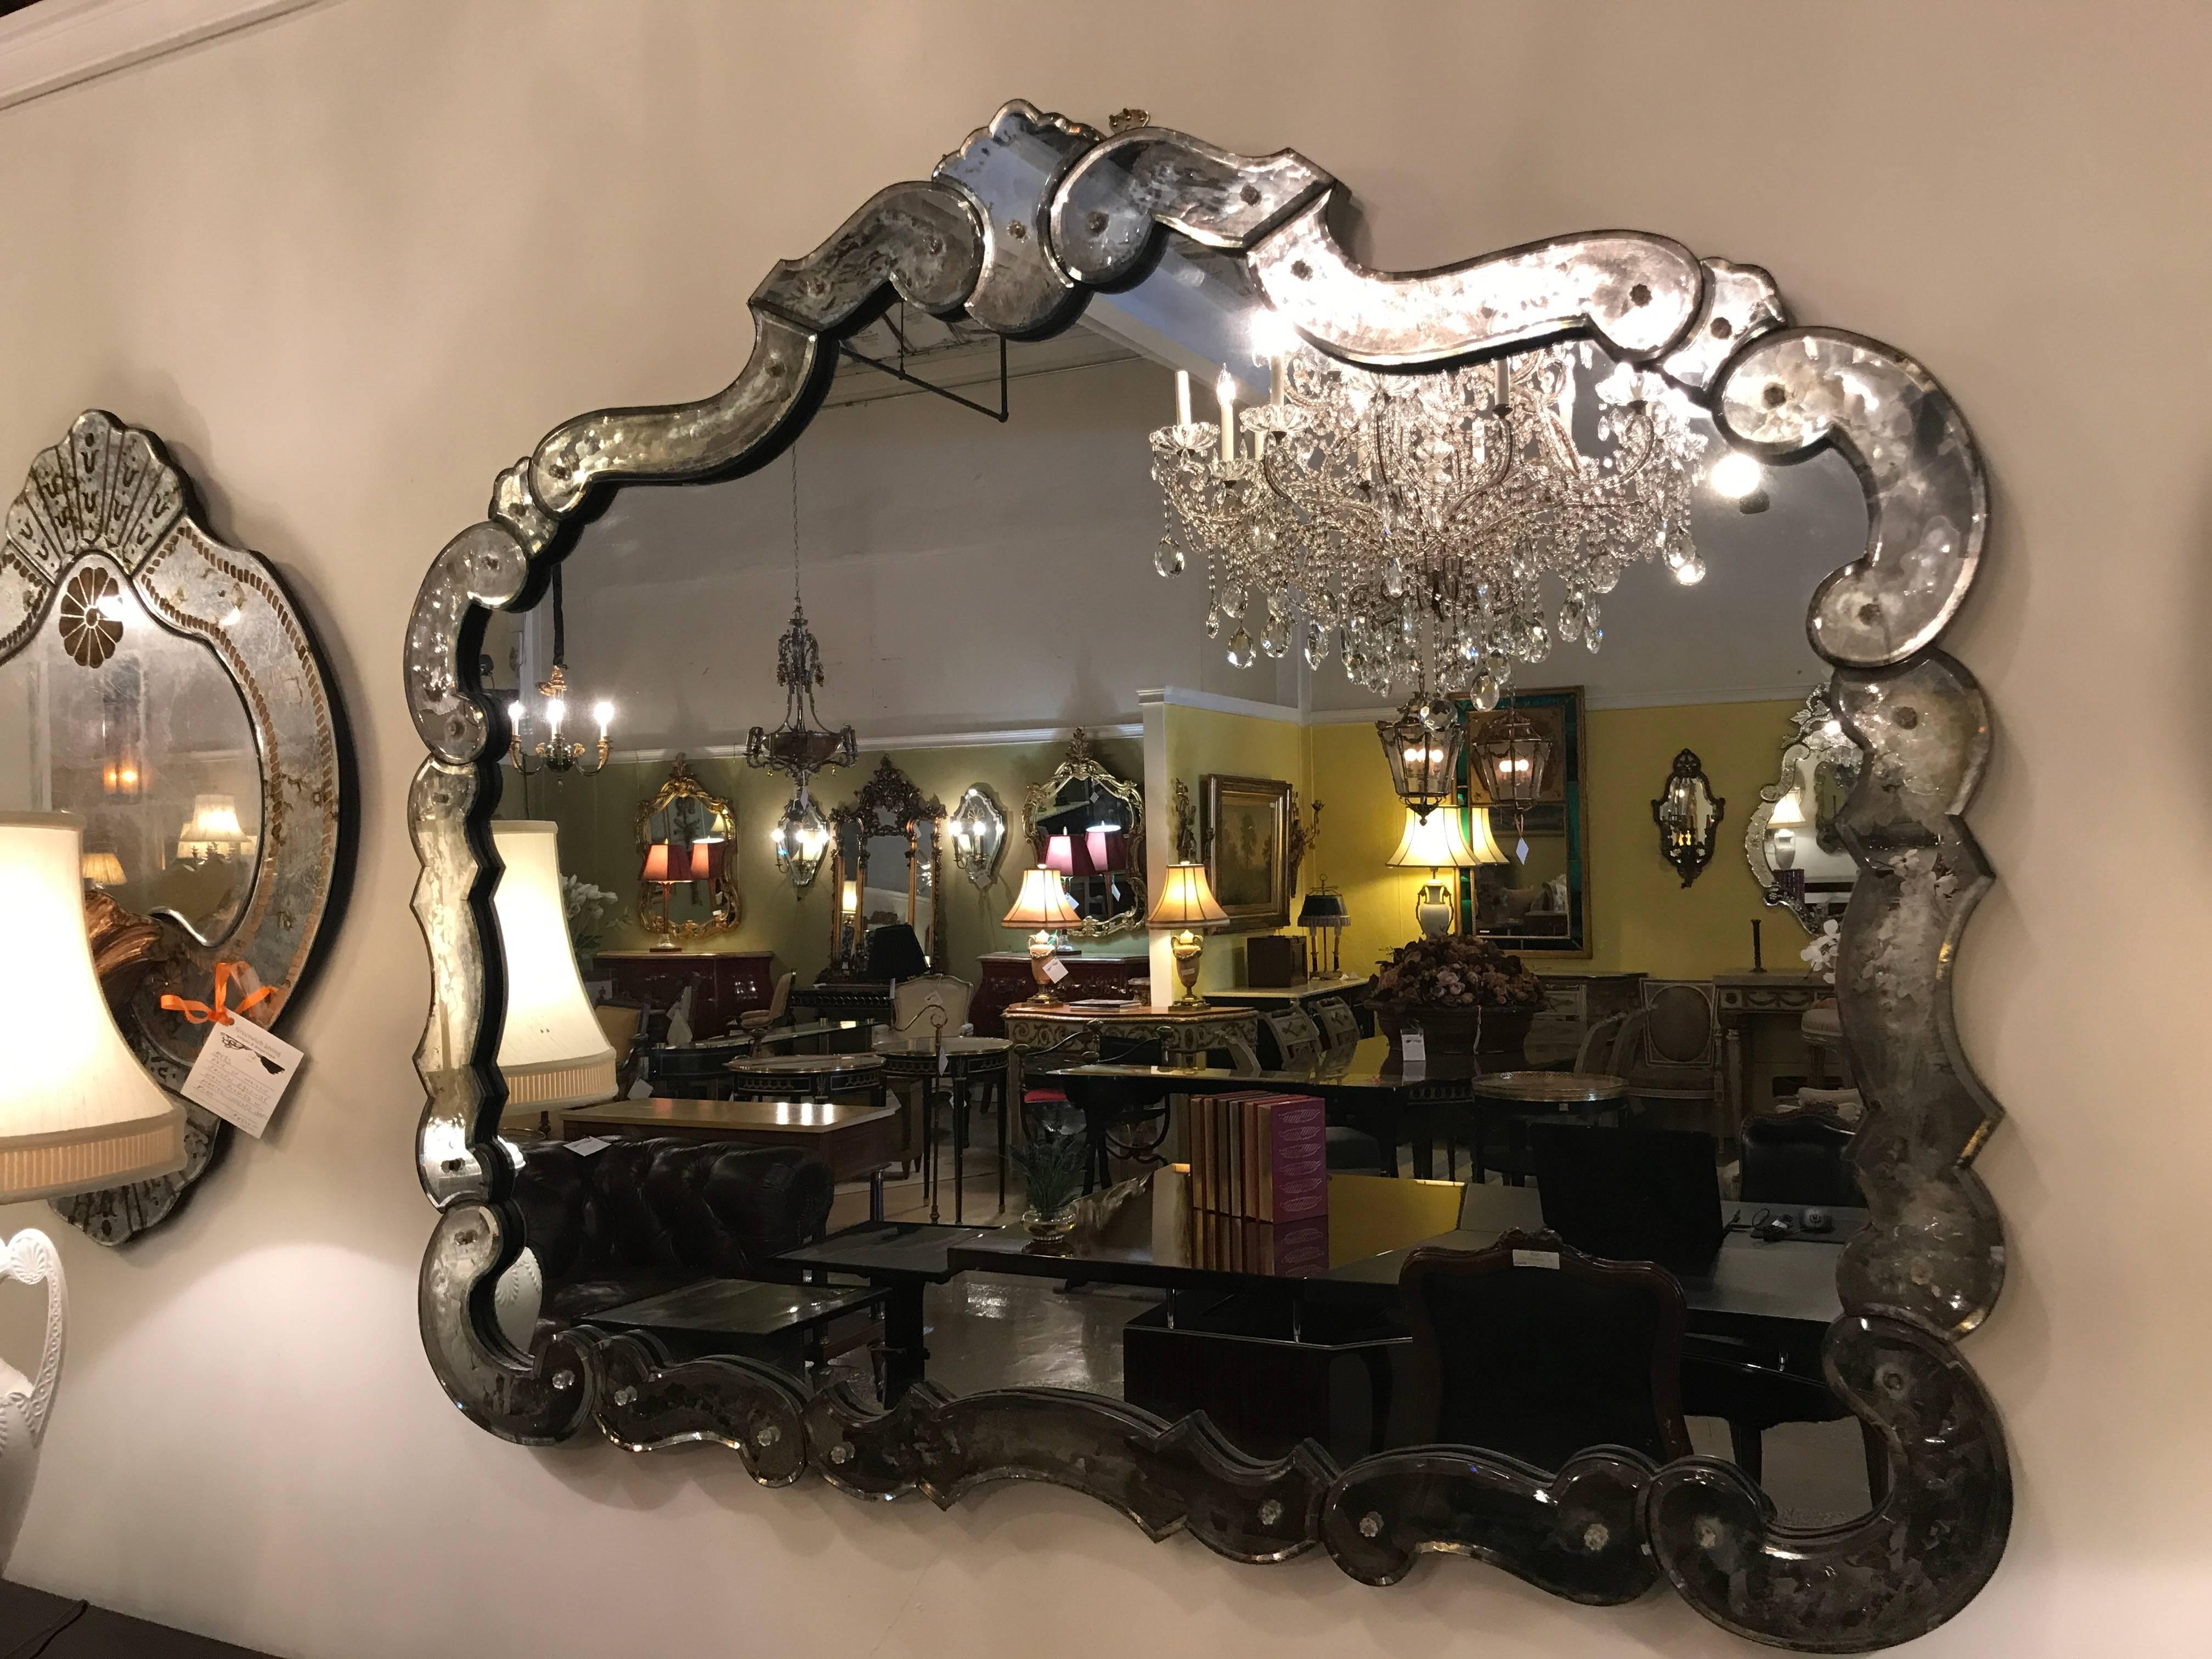 A fine Venetian style circa 1930s vanity or over the mantel mirror. This mirror in very Fine condition lends old world Hollywood Regency style to any room in the home or office. The distressed beveled frame of multiple parts flanks the central clear